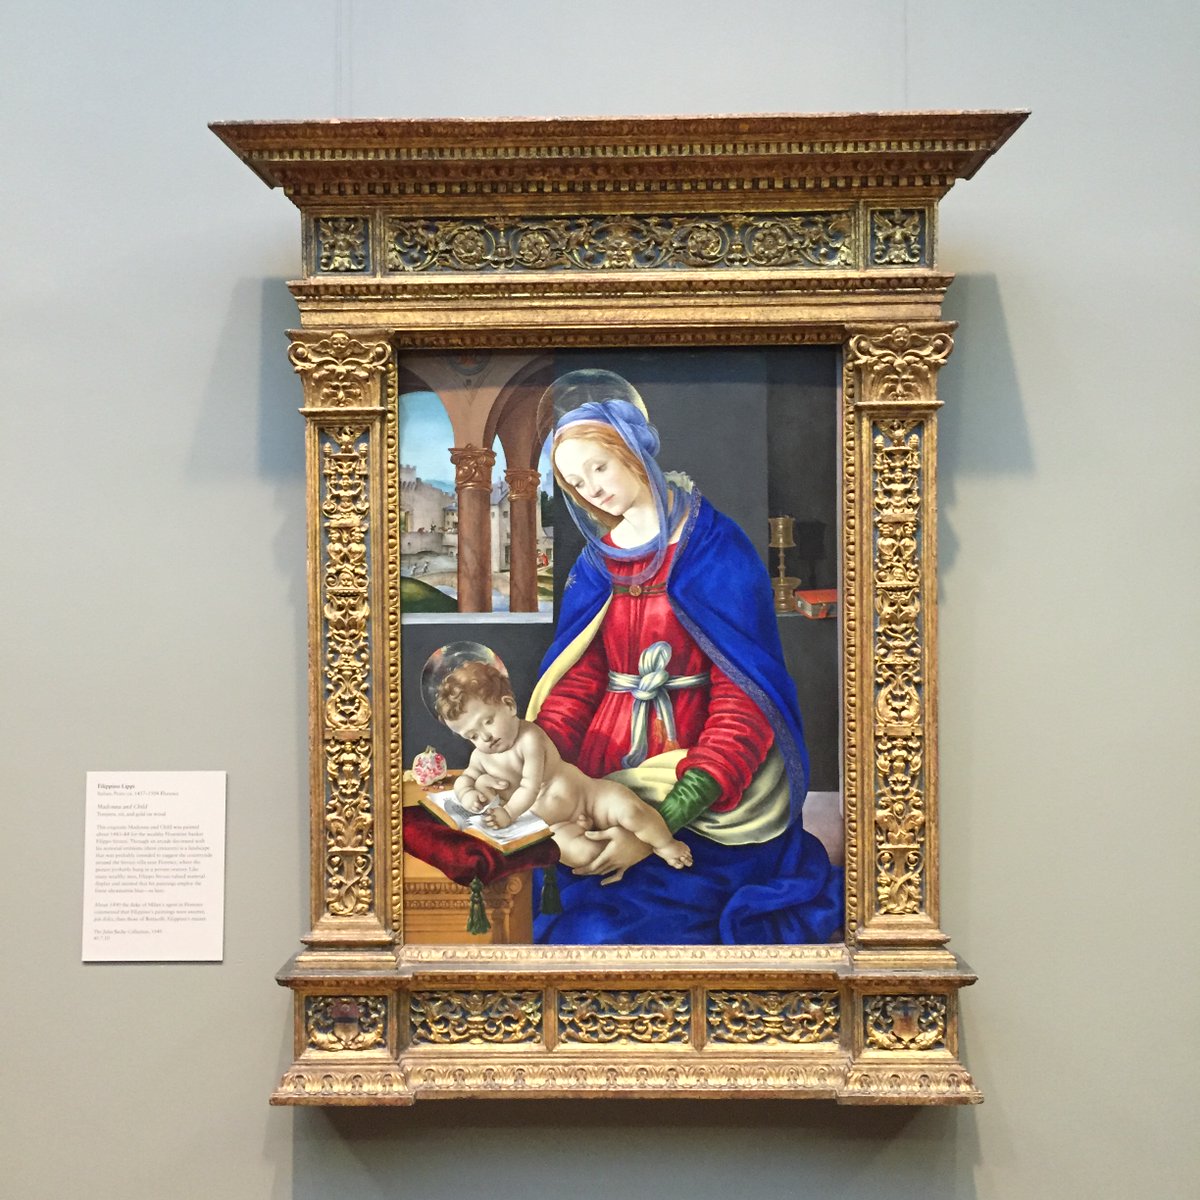 This exquisite 'Madonna and Child' was painted by #FilippinoLippi about 1483-84 for the wealthy Florentine banker Filippo Strozzi. 

Like many wealthy men, Filippo Strozzi valued material display and insisted that his paintings employ the finest ultramarine blue - as here.